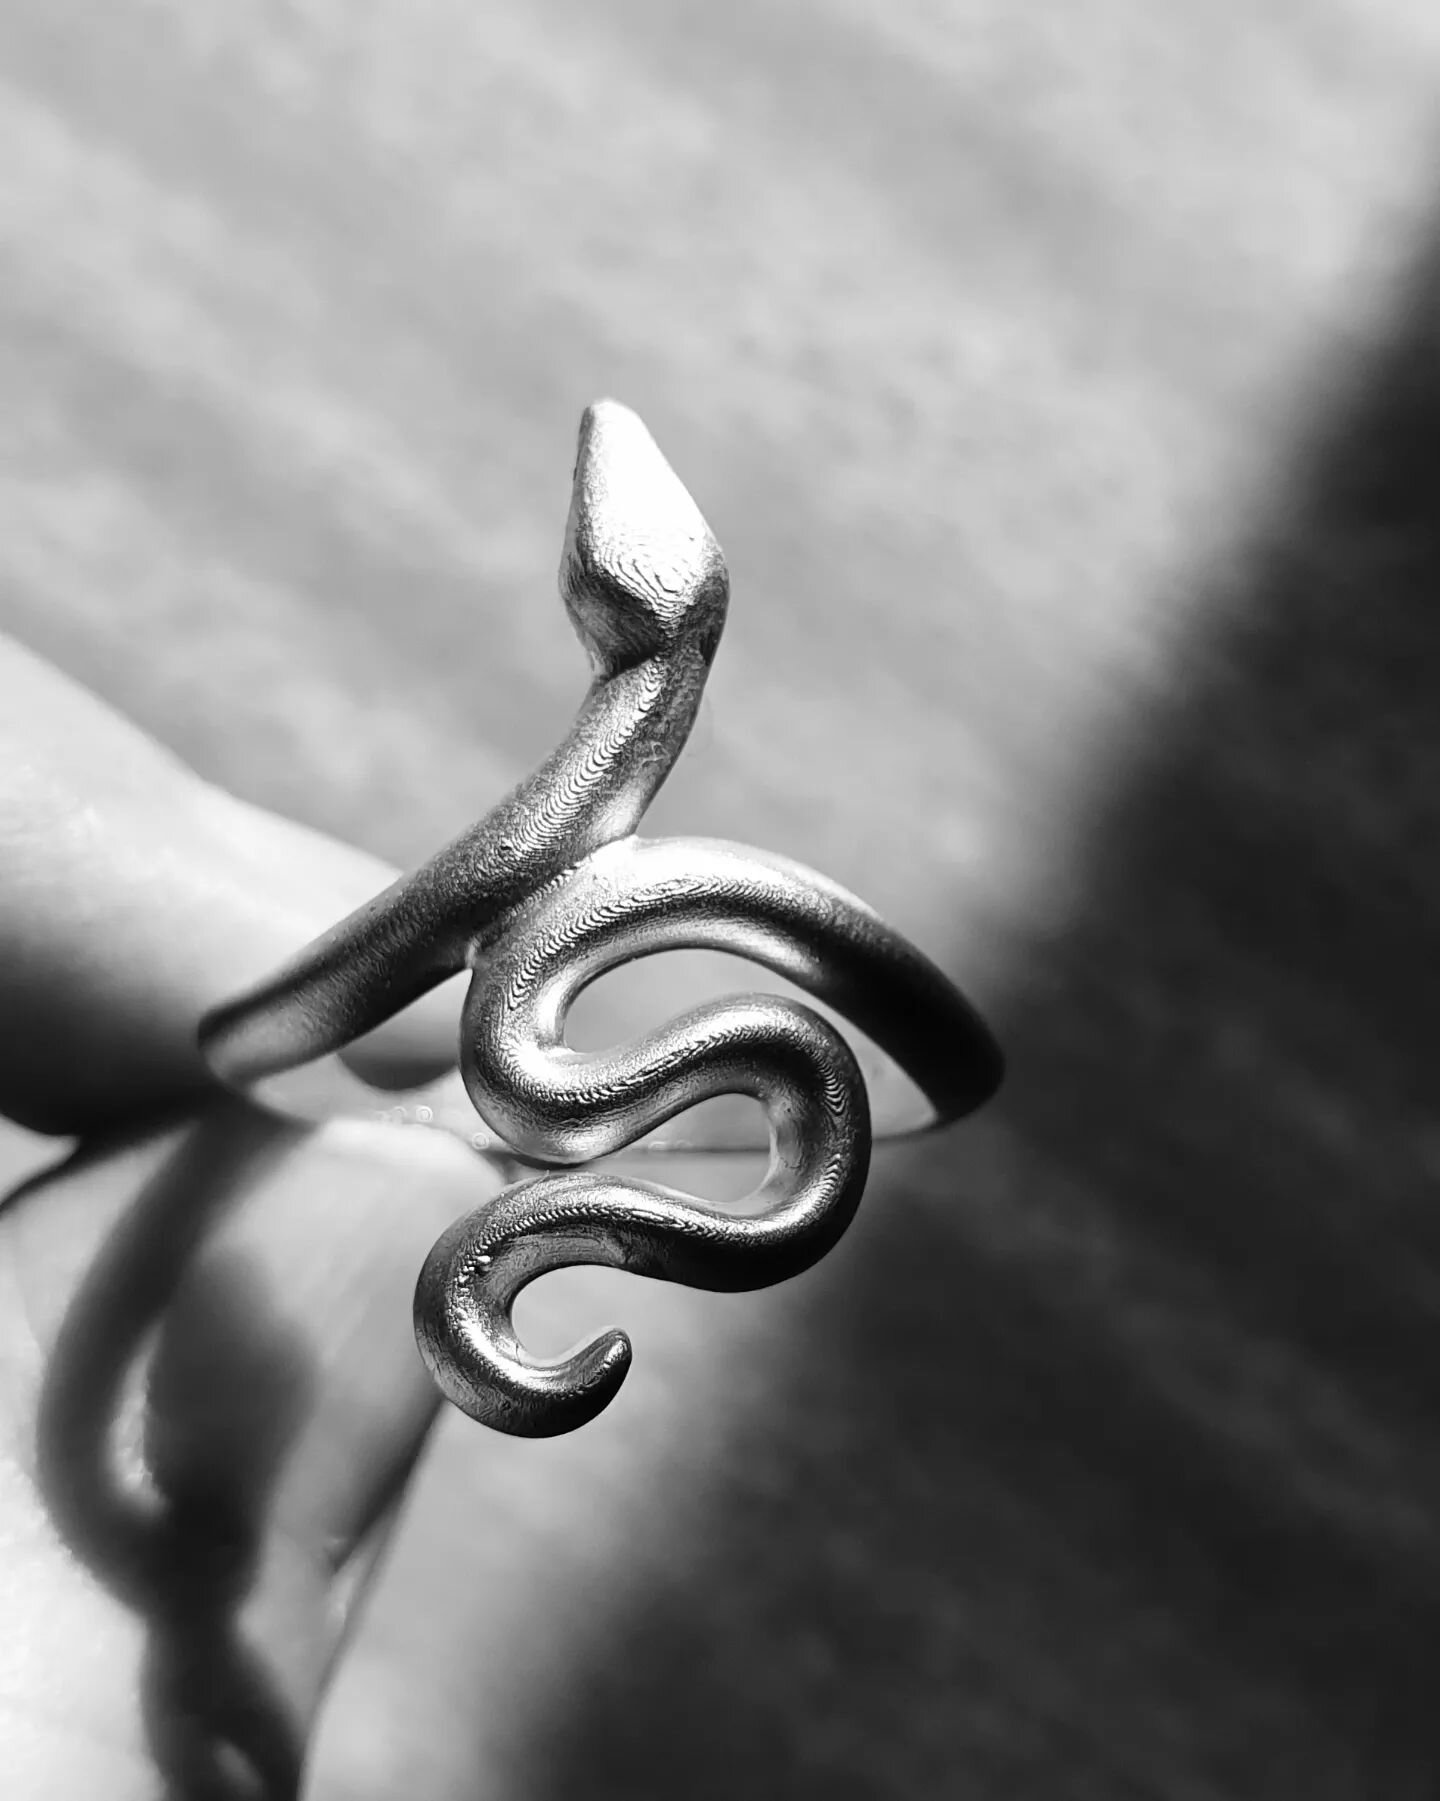 Snake in the make! 💍🐍💎

Super excited about this exquisite custom snake ring commission I am currently working on.

This is the raw silver sample model straight back from the metal casters - this is made first so I can check the size, dimension an